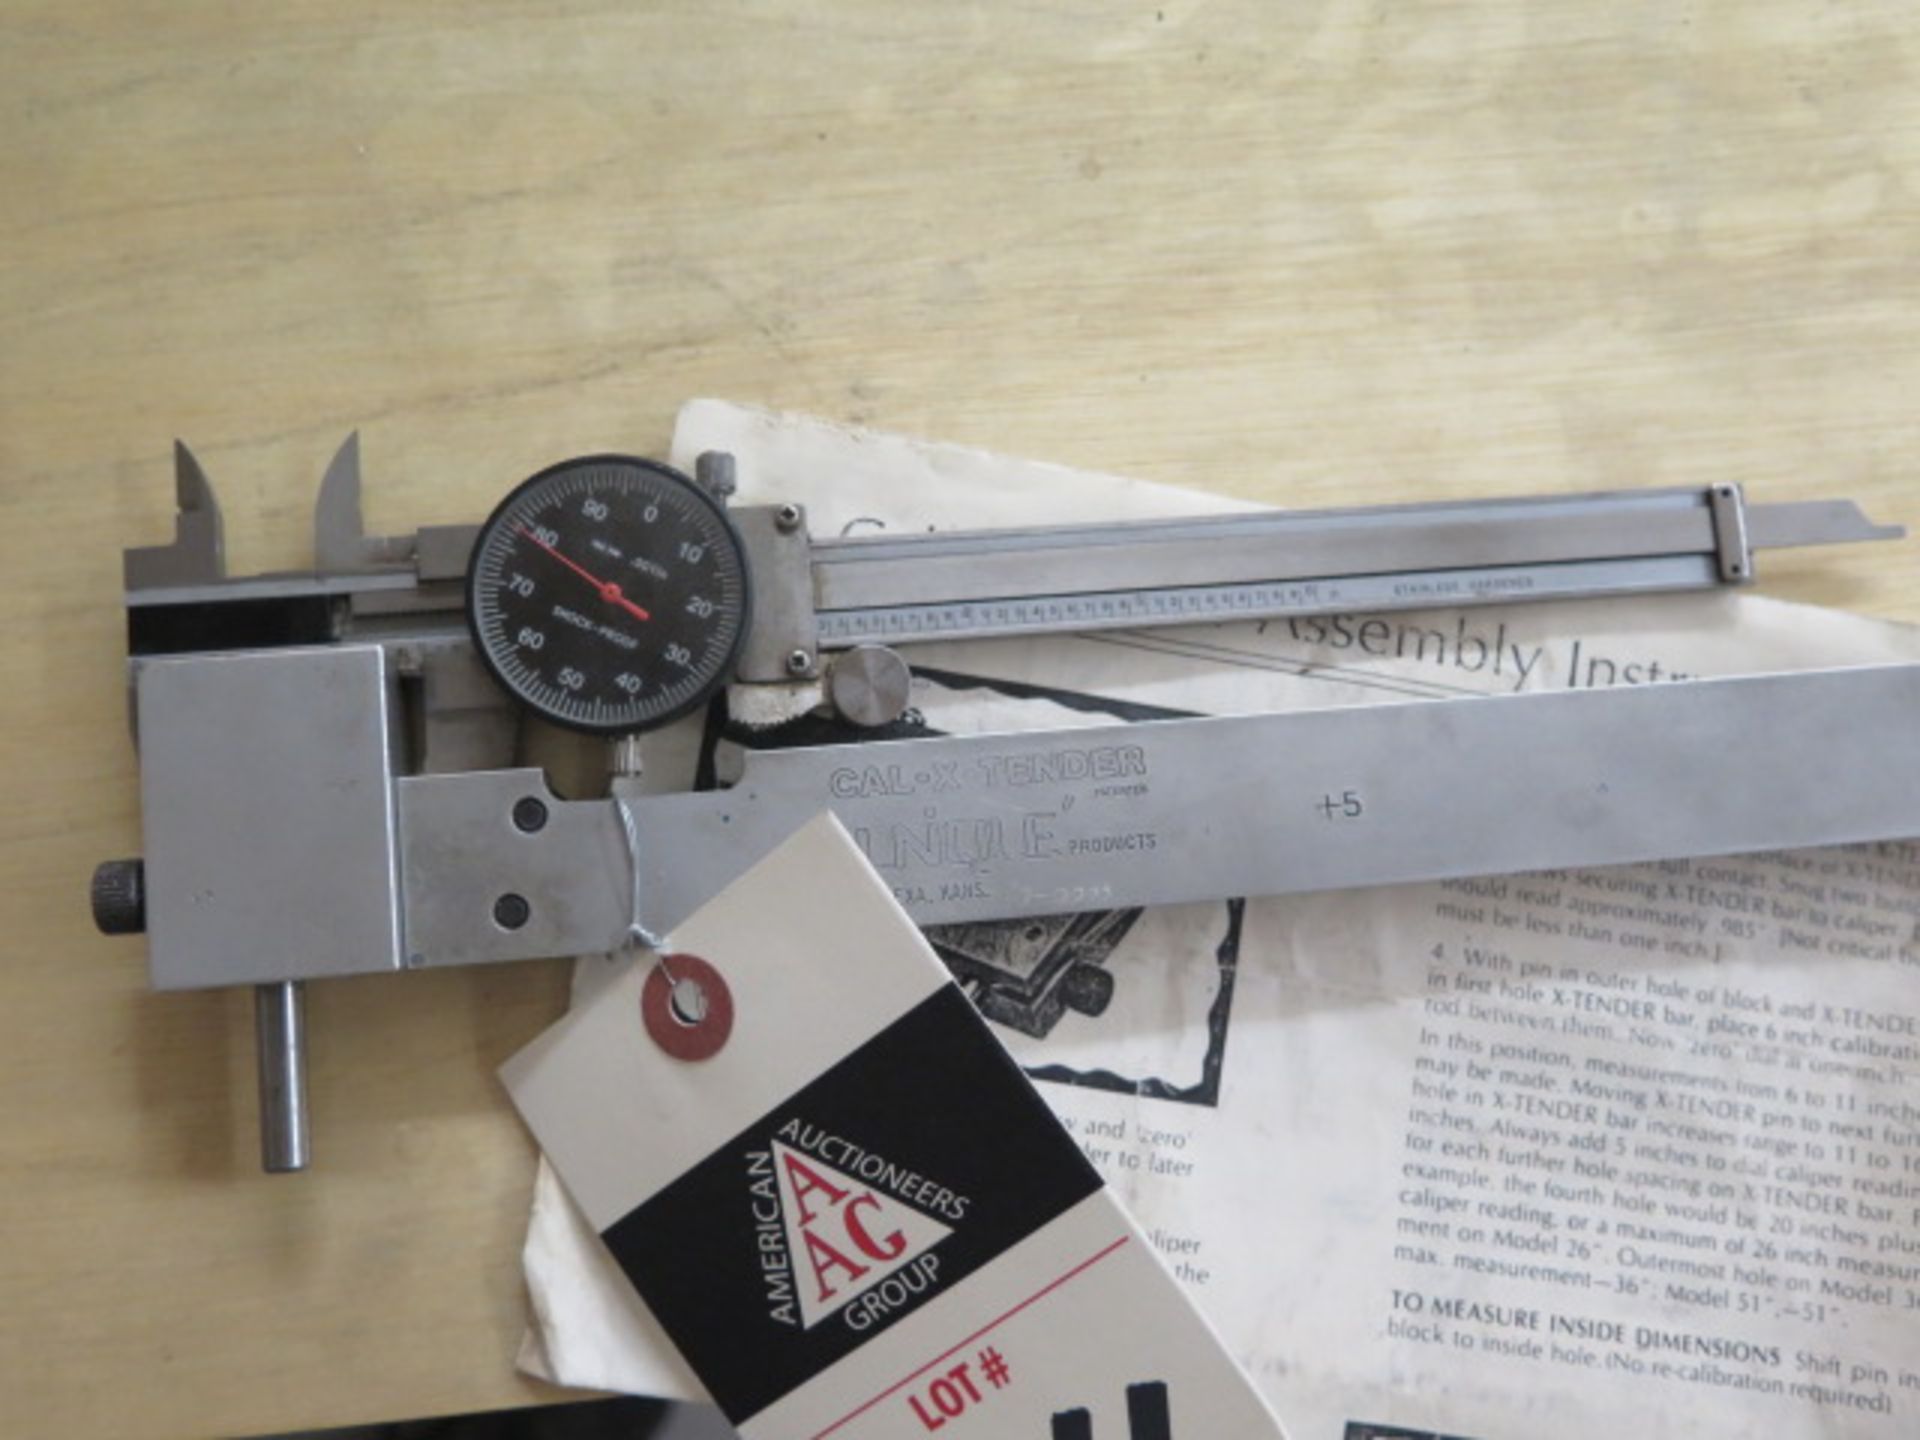 Unique Products CAL-X-Tender 45" Dial Caliper Extension Gage - Image 2 of 2